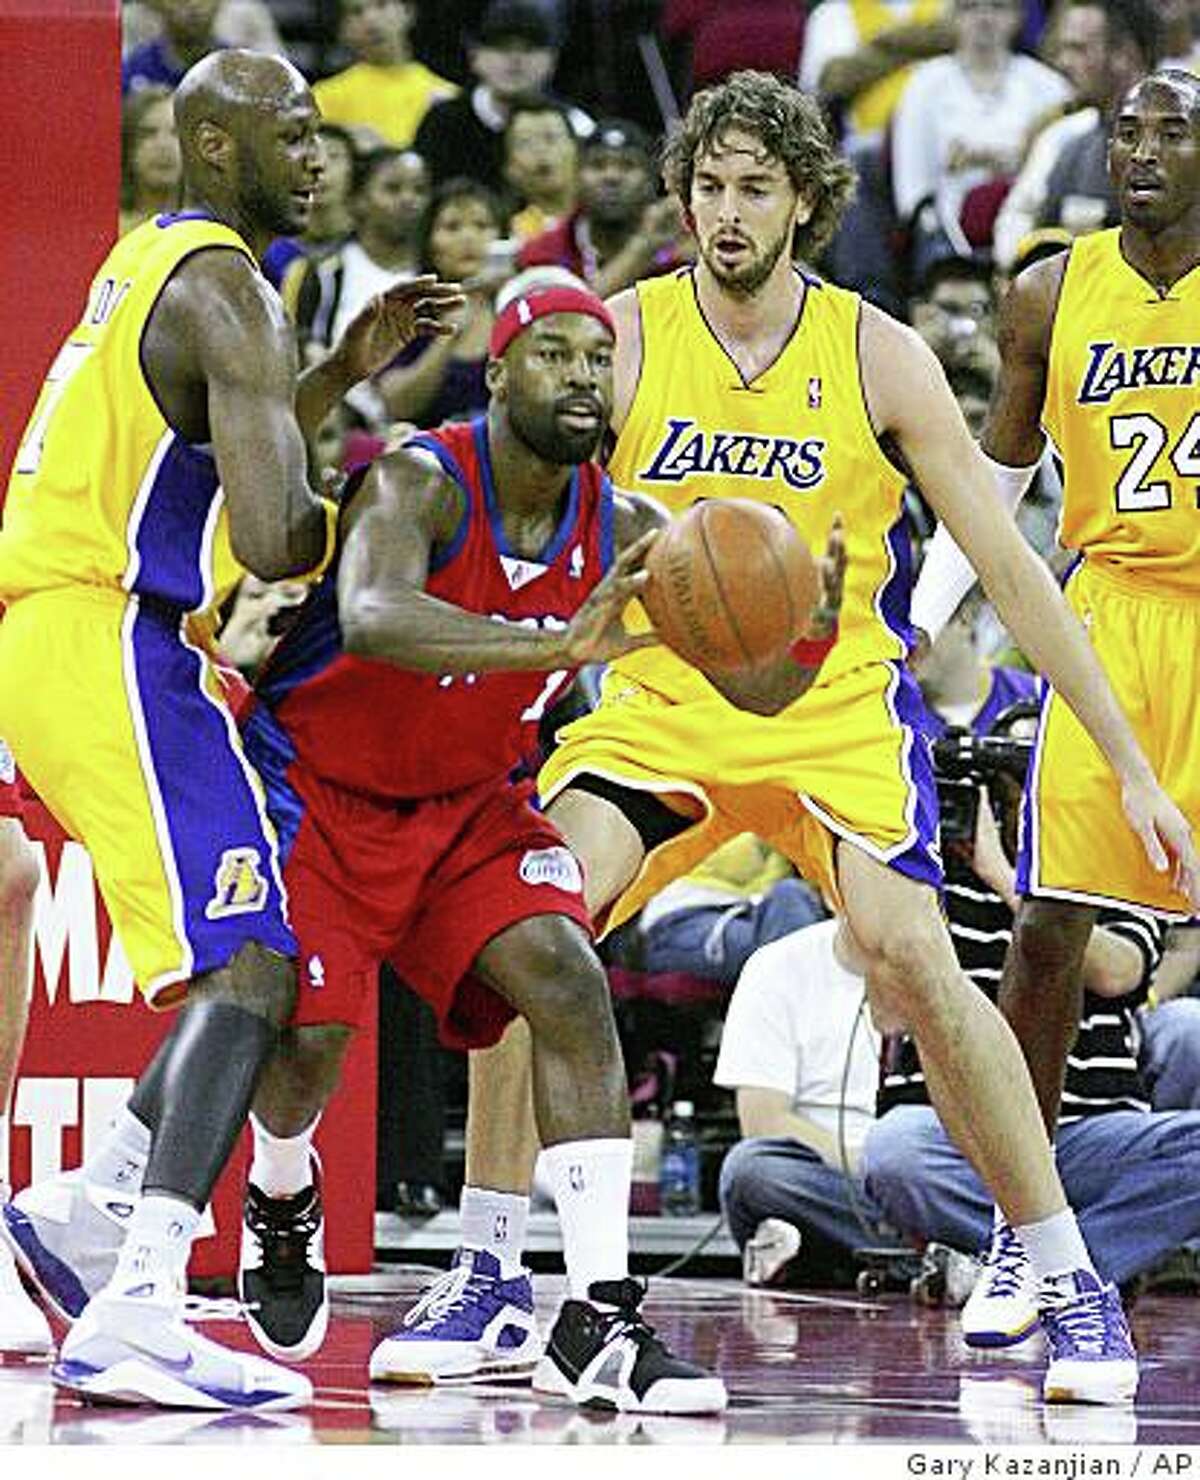 Los Angeles Clippers' Baron Davis, center, looks to pass between Los Angeles Lakers' Paul Gasol, right, of Spain, and Lamar Odom, left in the first half of a preseason game on Thursday, Oct. 9, 2008, in Fresno, Calif.